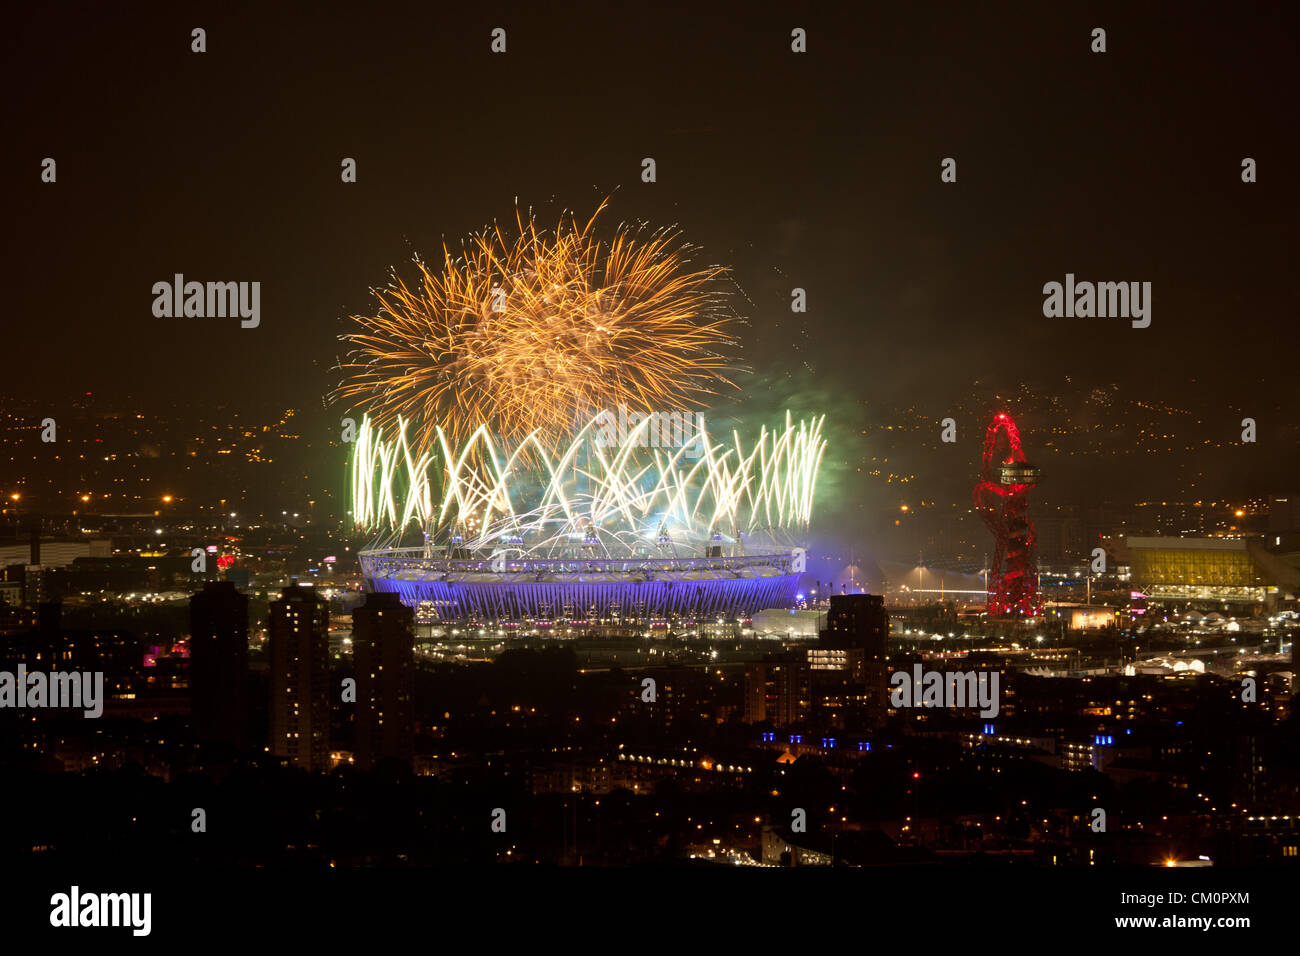 LONDON, UK, 9th Sep, 2012. Fireworks light up the sky over the Olympic Stadium during the 2012 Paralympics closing ceremony, as seen from Canary Wharf, the financial centre in London's historic docklands. Stock Photo